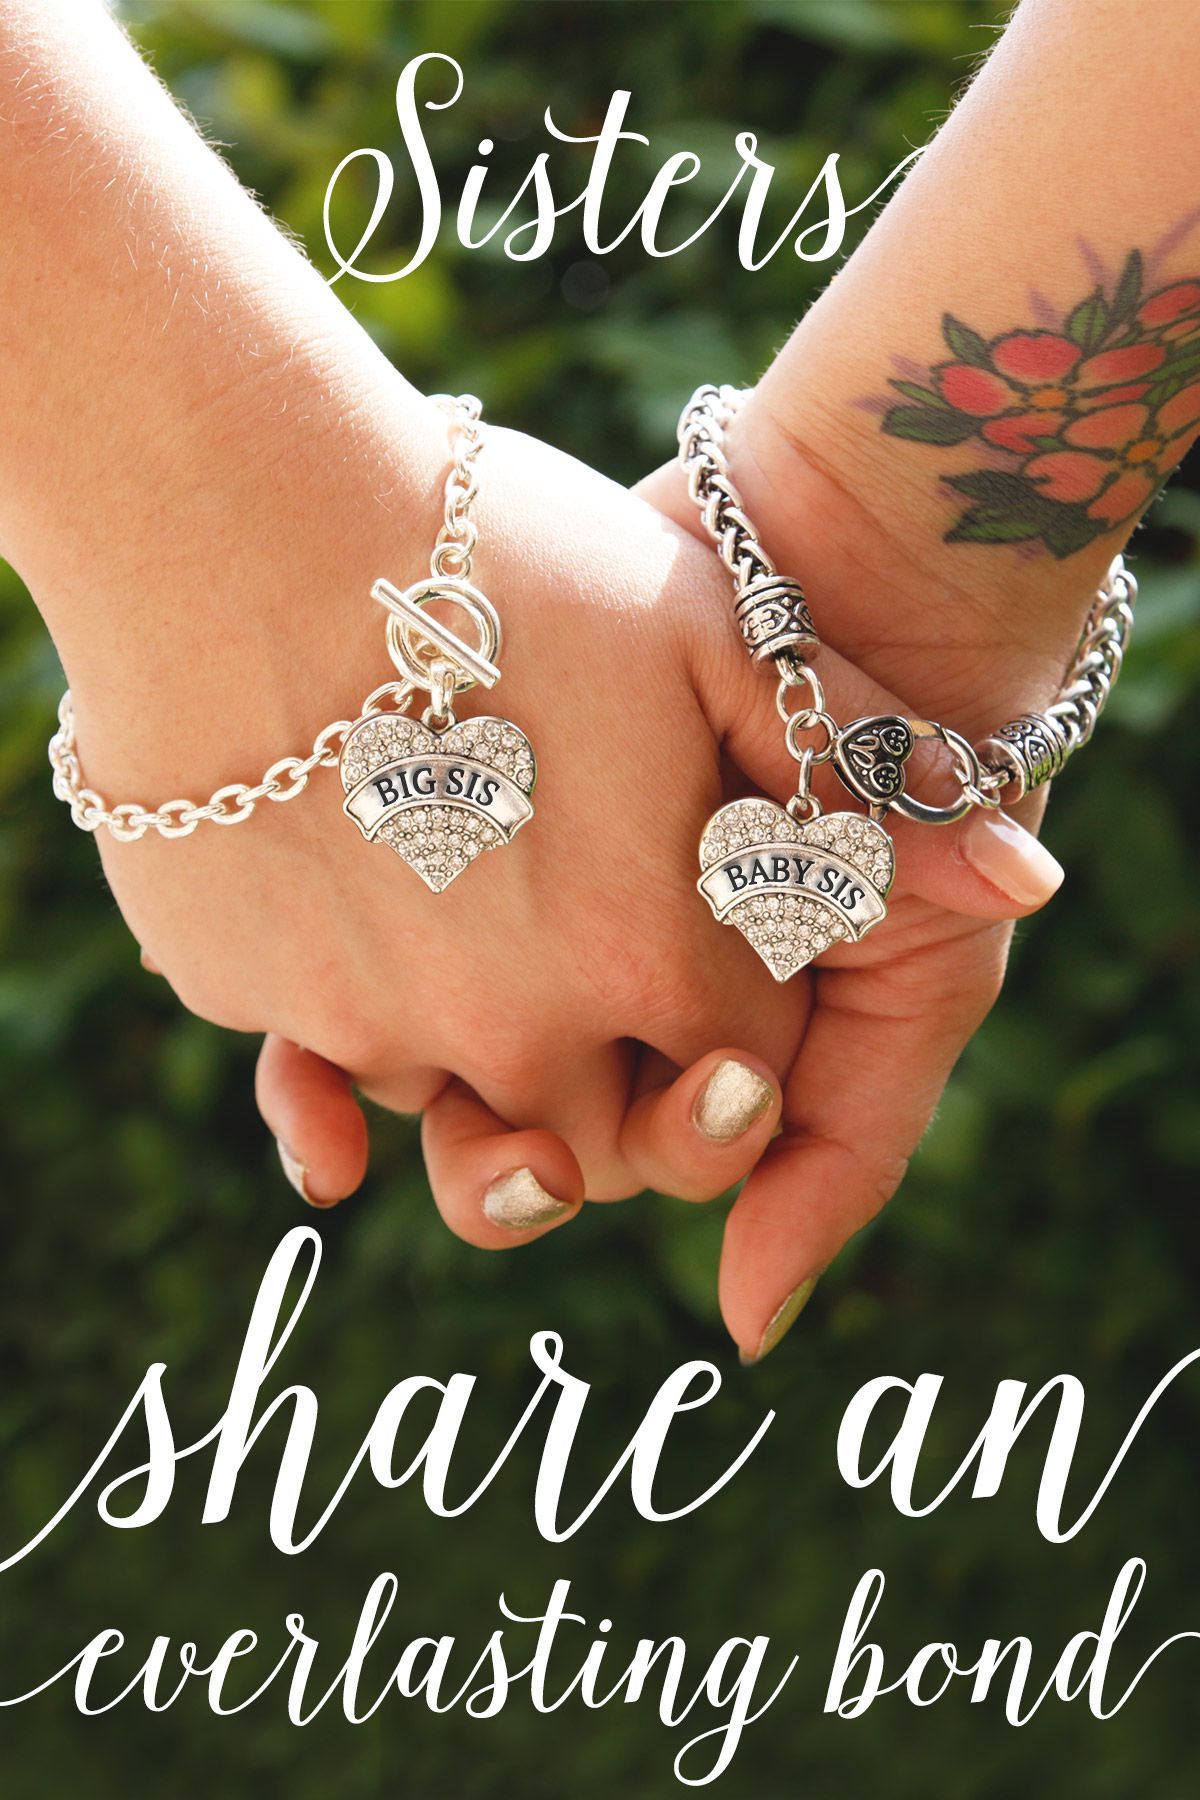 Do you love you sisters? Sisters share an unspoken bond throughout life. #inspiredsilver now has matching